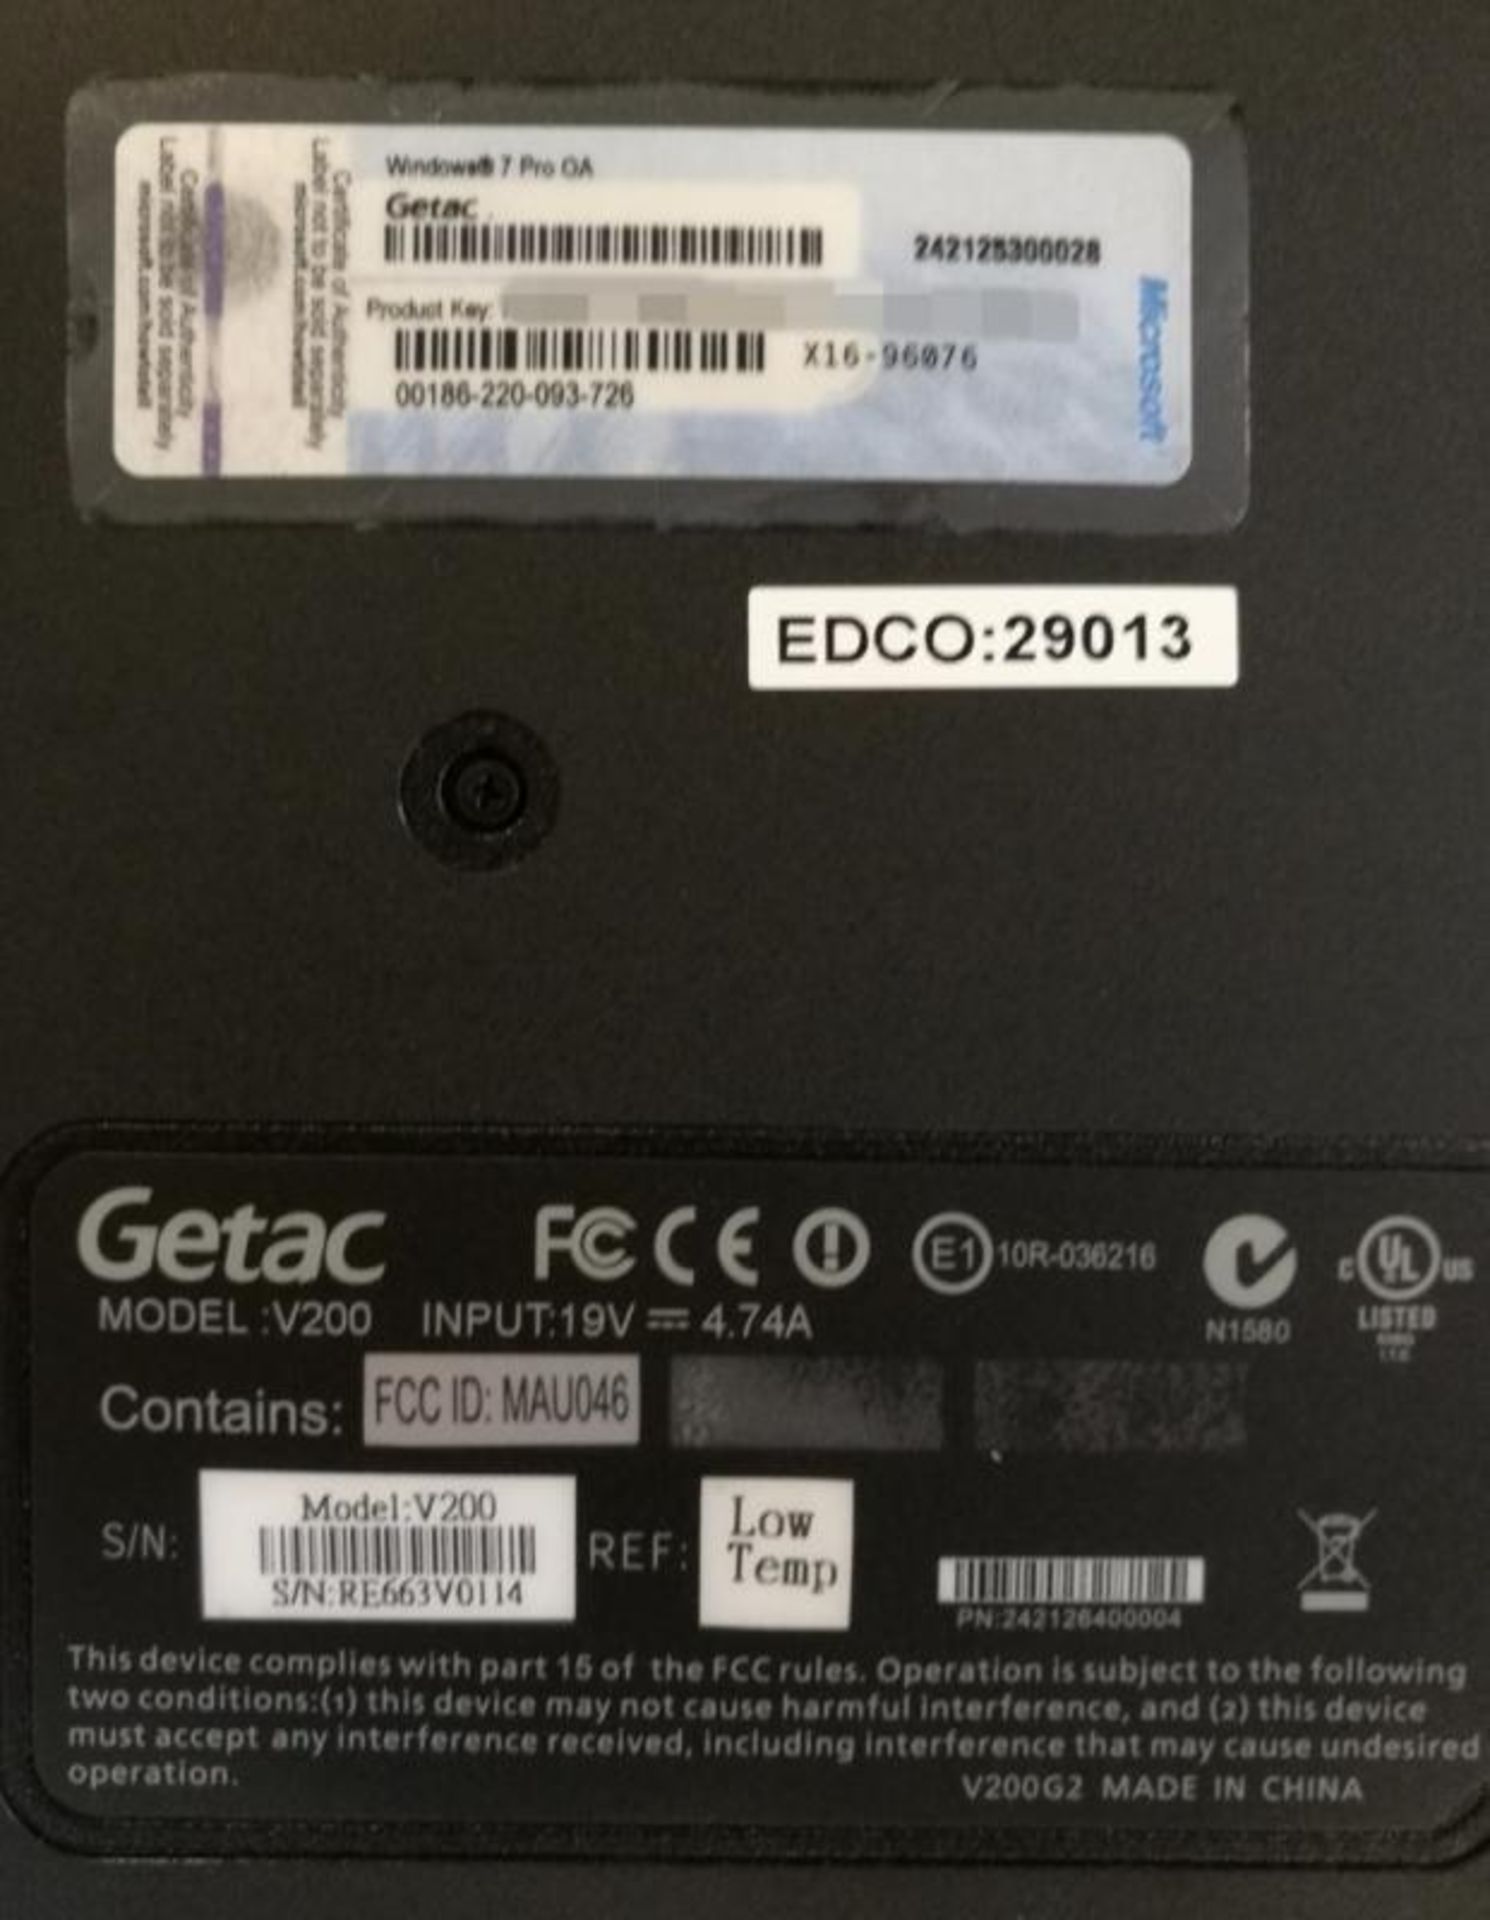 1 x Getac V200 Rugged Laptop Computer - Rugged Laptop That Transforms into a Tablet PC - Features an - Image 3 of 8